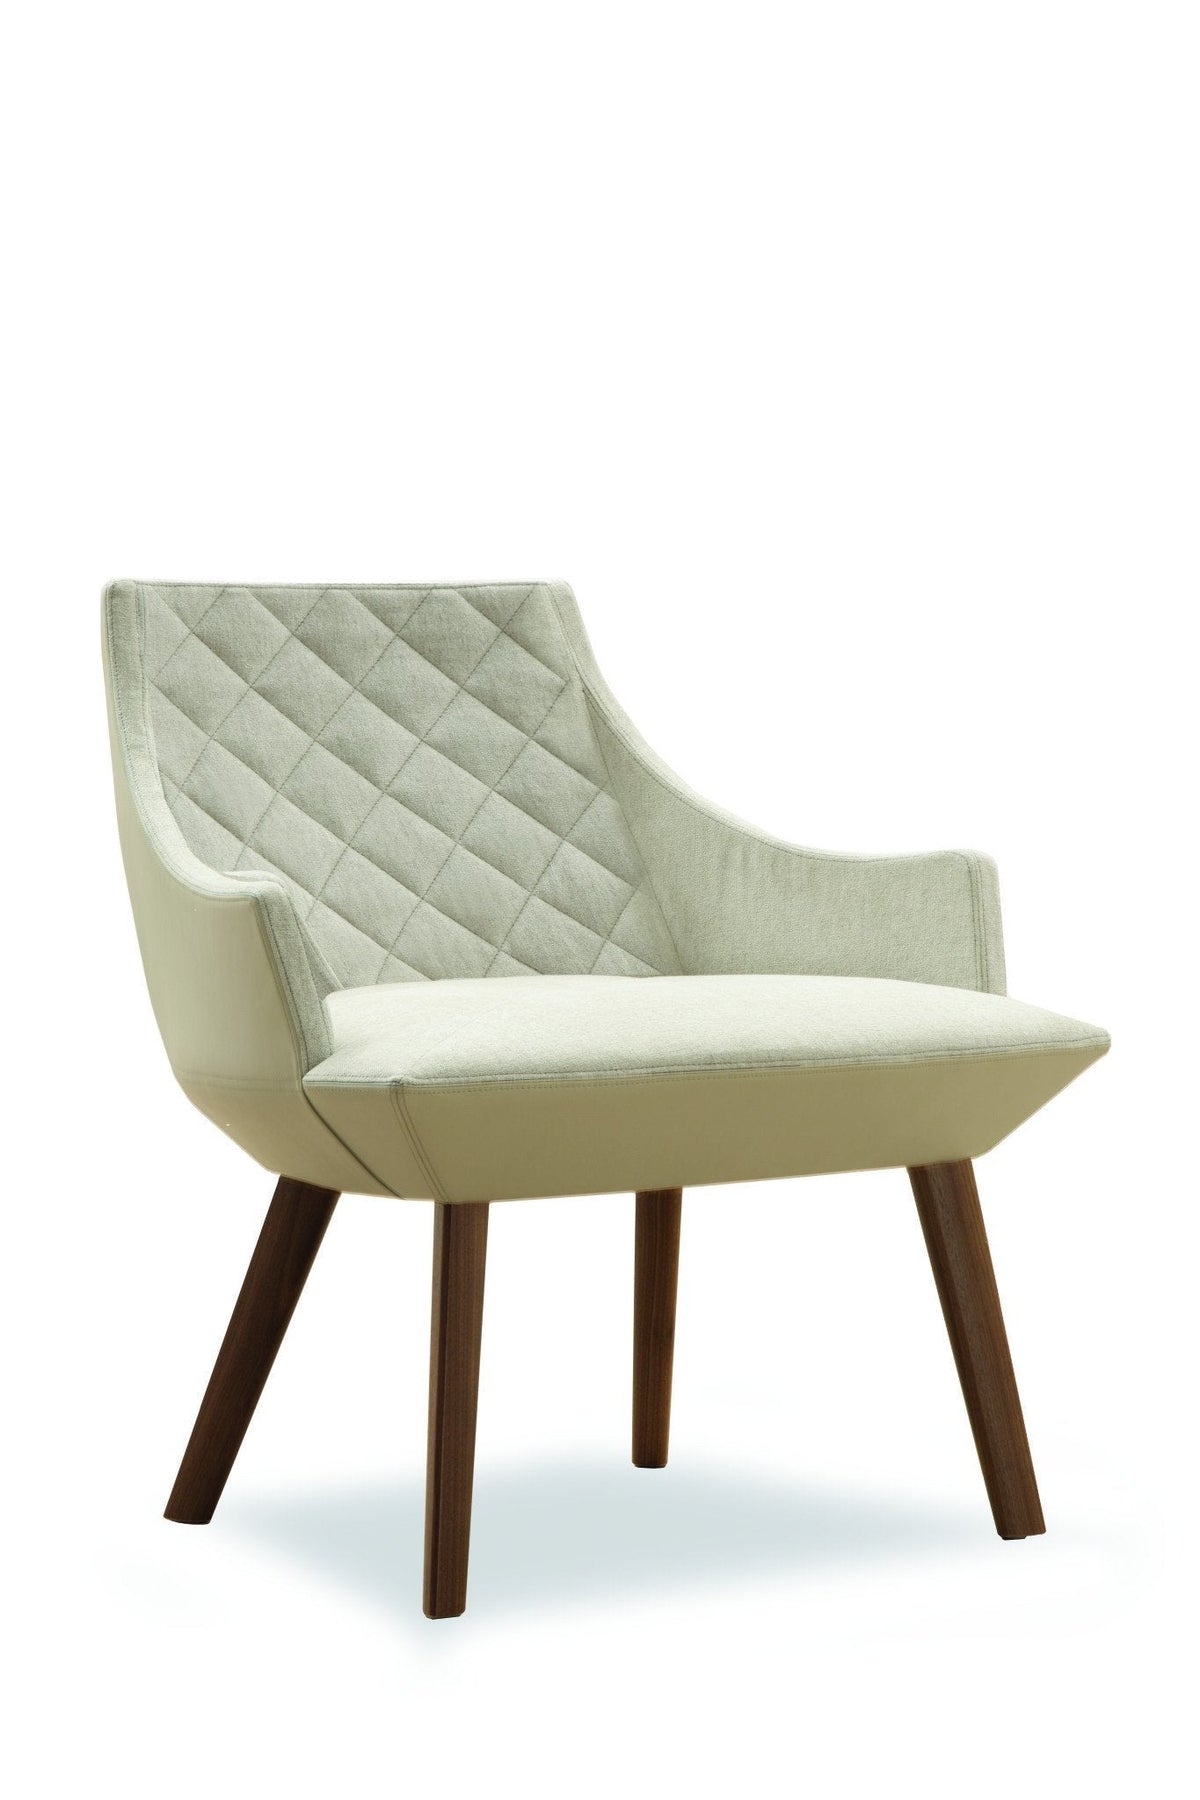 Beret 301 Lounge Chair-Tonon-Contract Furniture Store